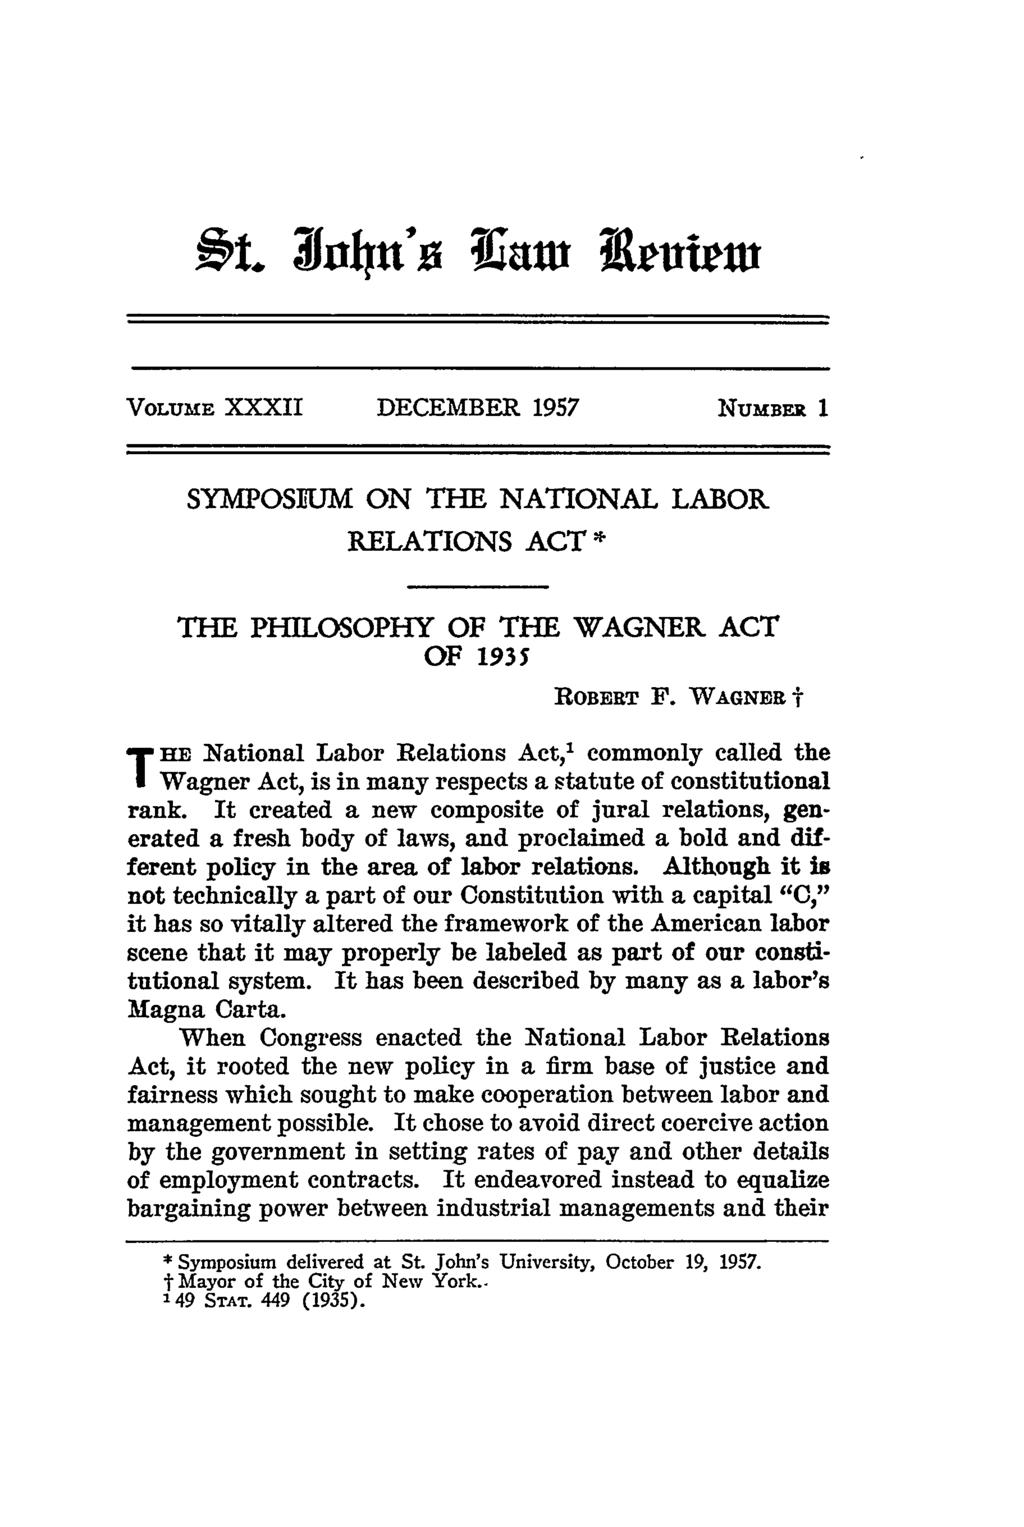 VOLUME XXXII DECEMBER 1957 NuMBER 1 SYMAOSWJM ON THE NATIONAL LABOR RELATIONS ACT * THE PHILOSOPHY OF THE WAGNER ACT OF 1935 ROBERT F.